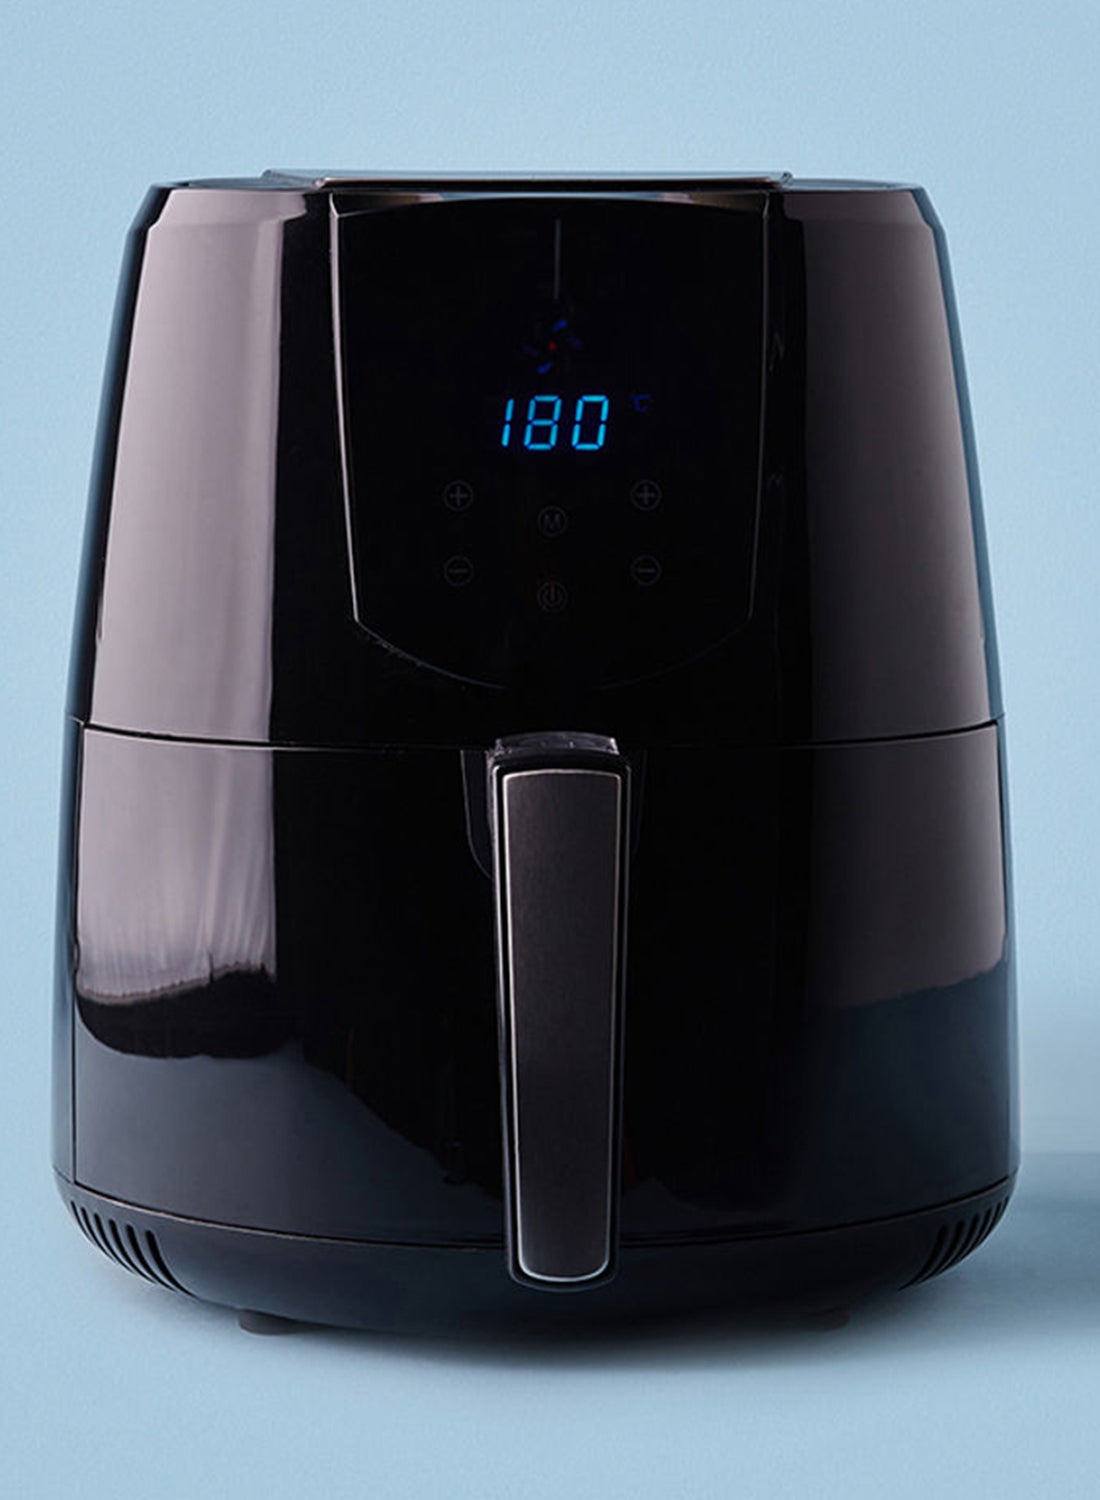 Digital Touch Air Fryer 3.2 Liter Capacity - Overload Protection - Healthy Air Fryer Without Oil 